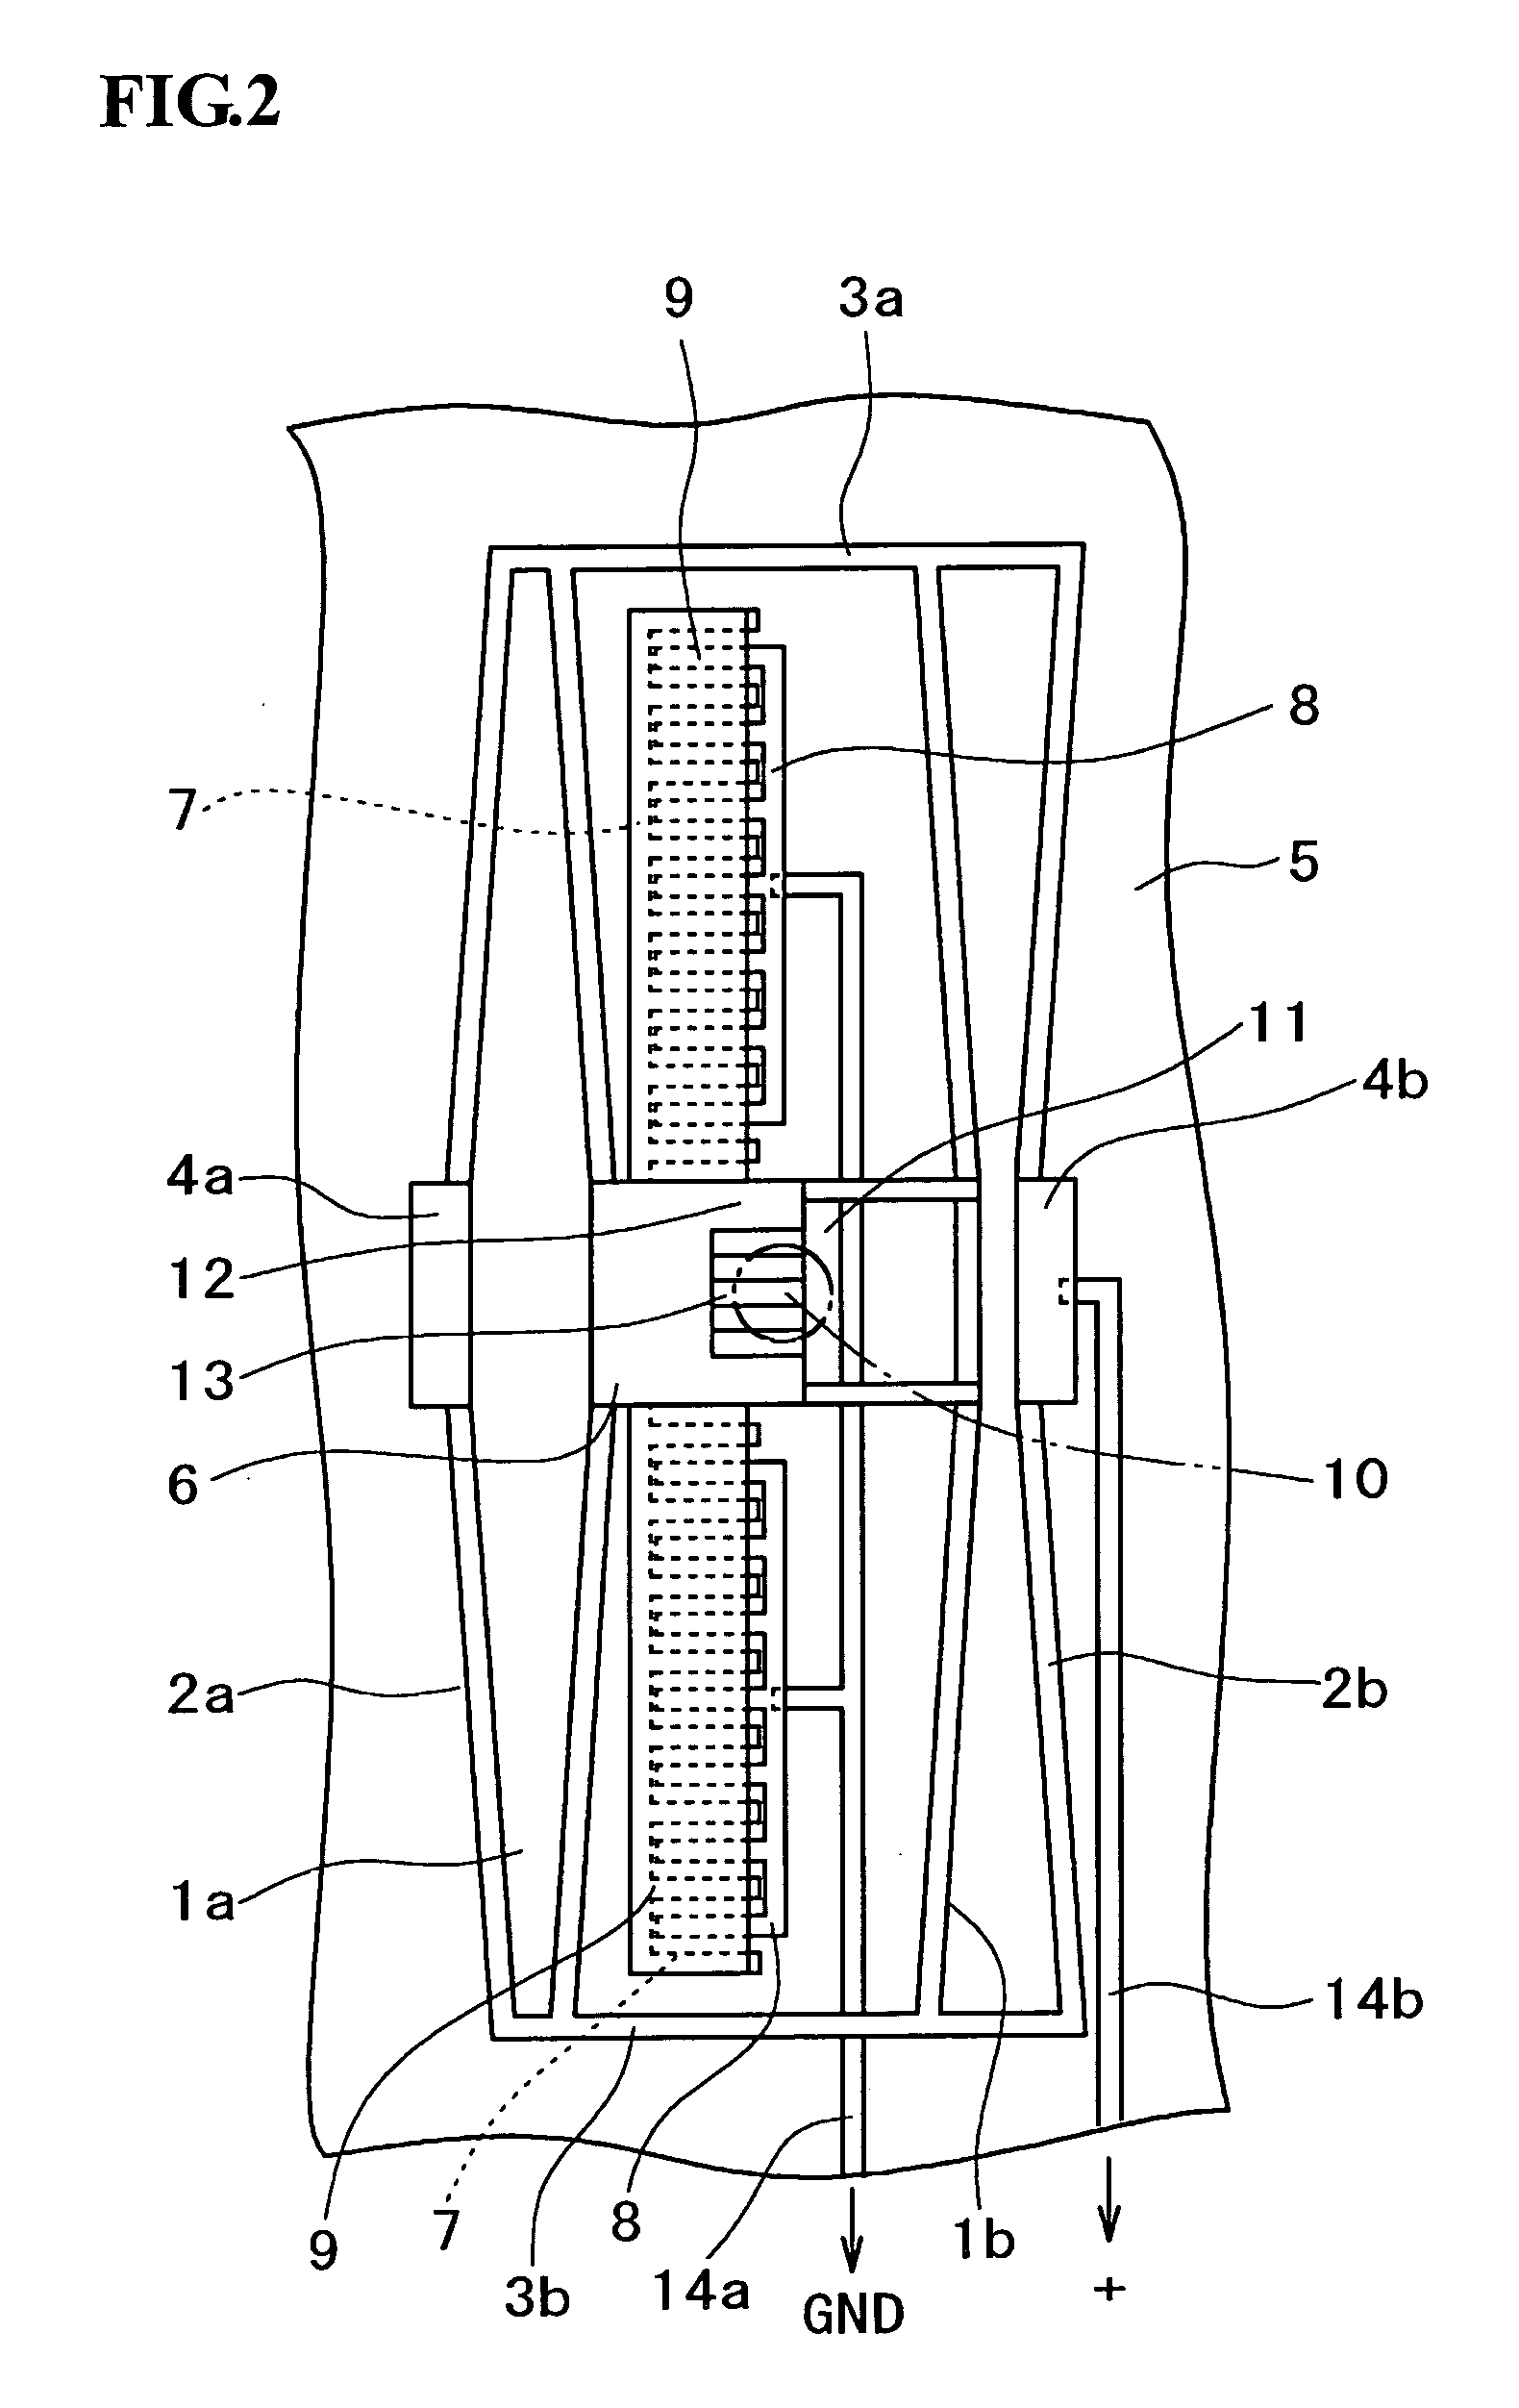 Electrostatic comb drive actuator, and optical controller using the electrostatic comb drive actuator